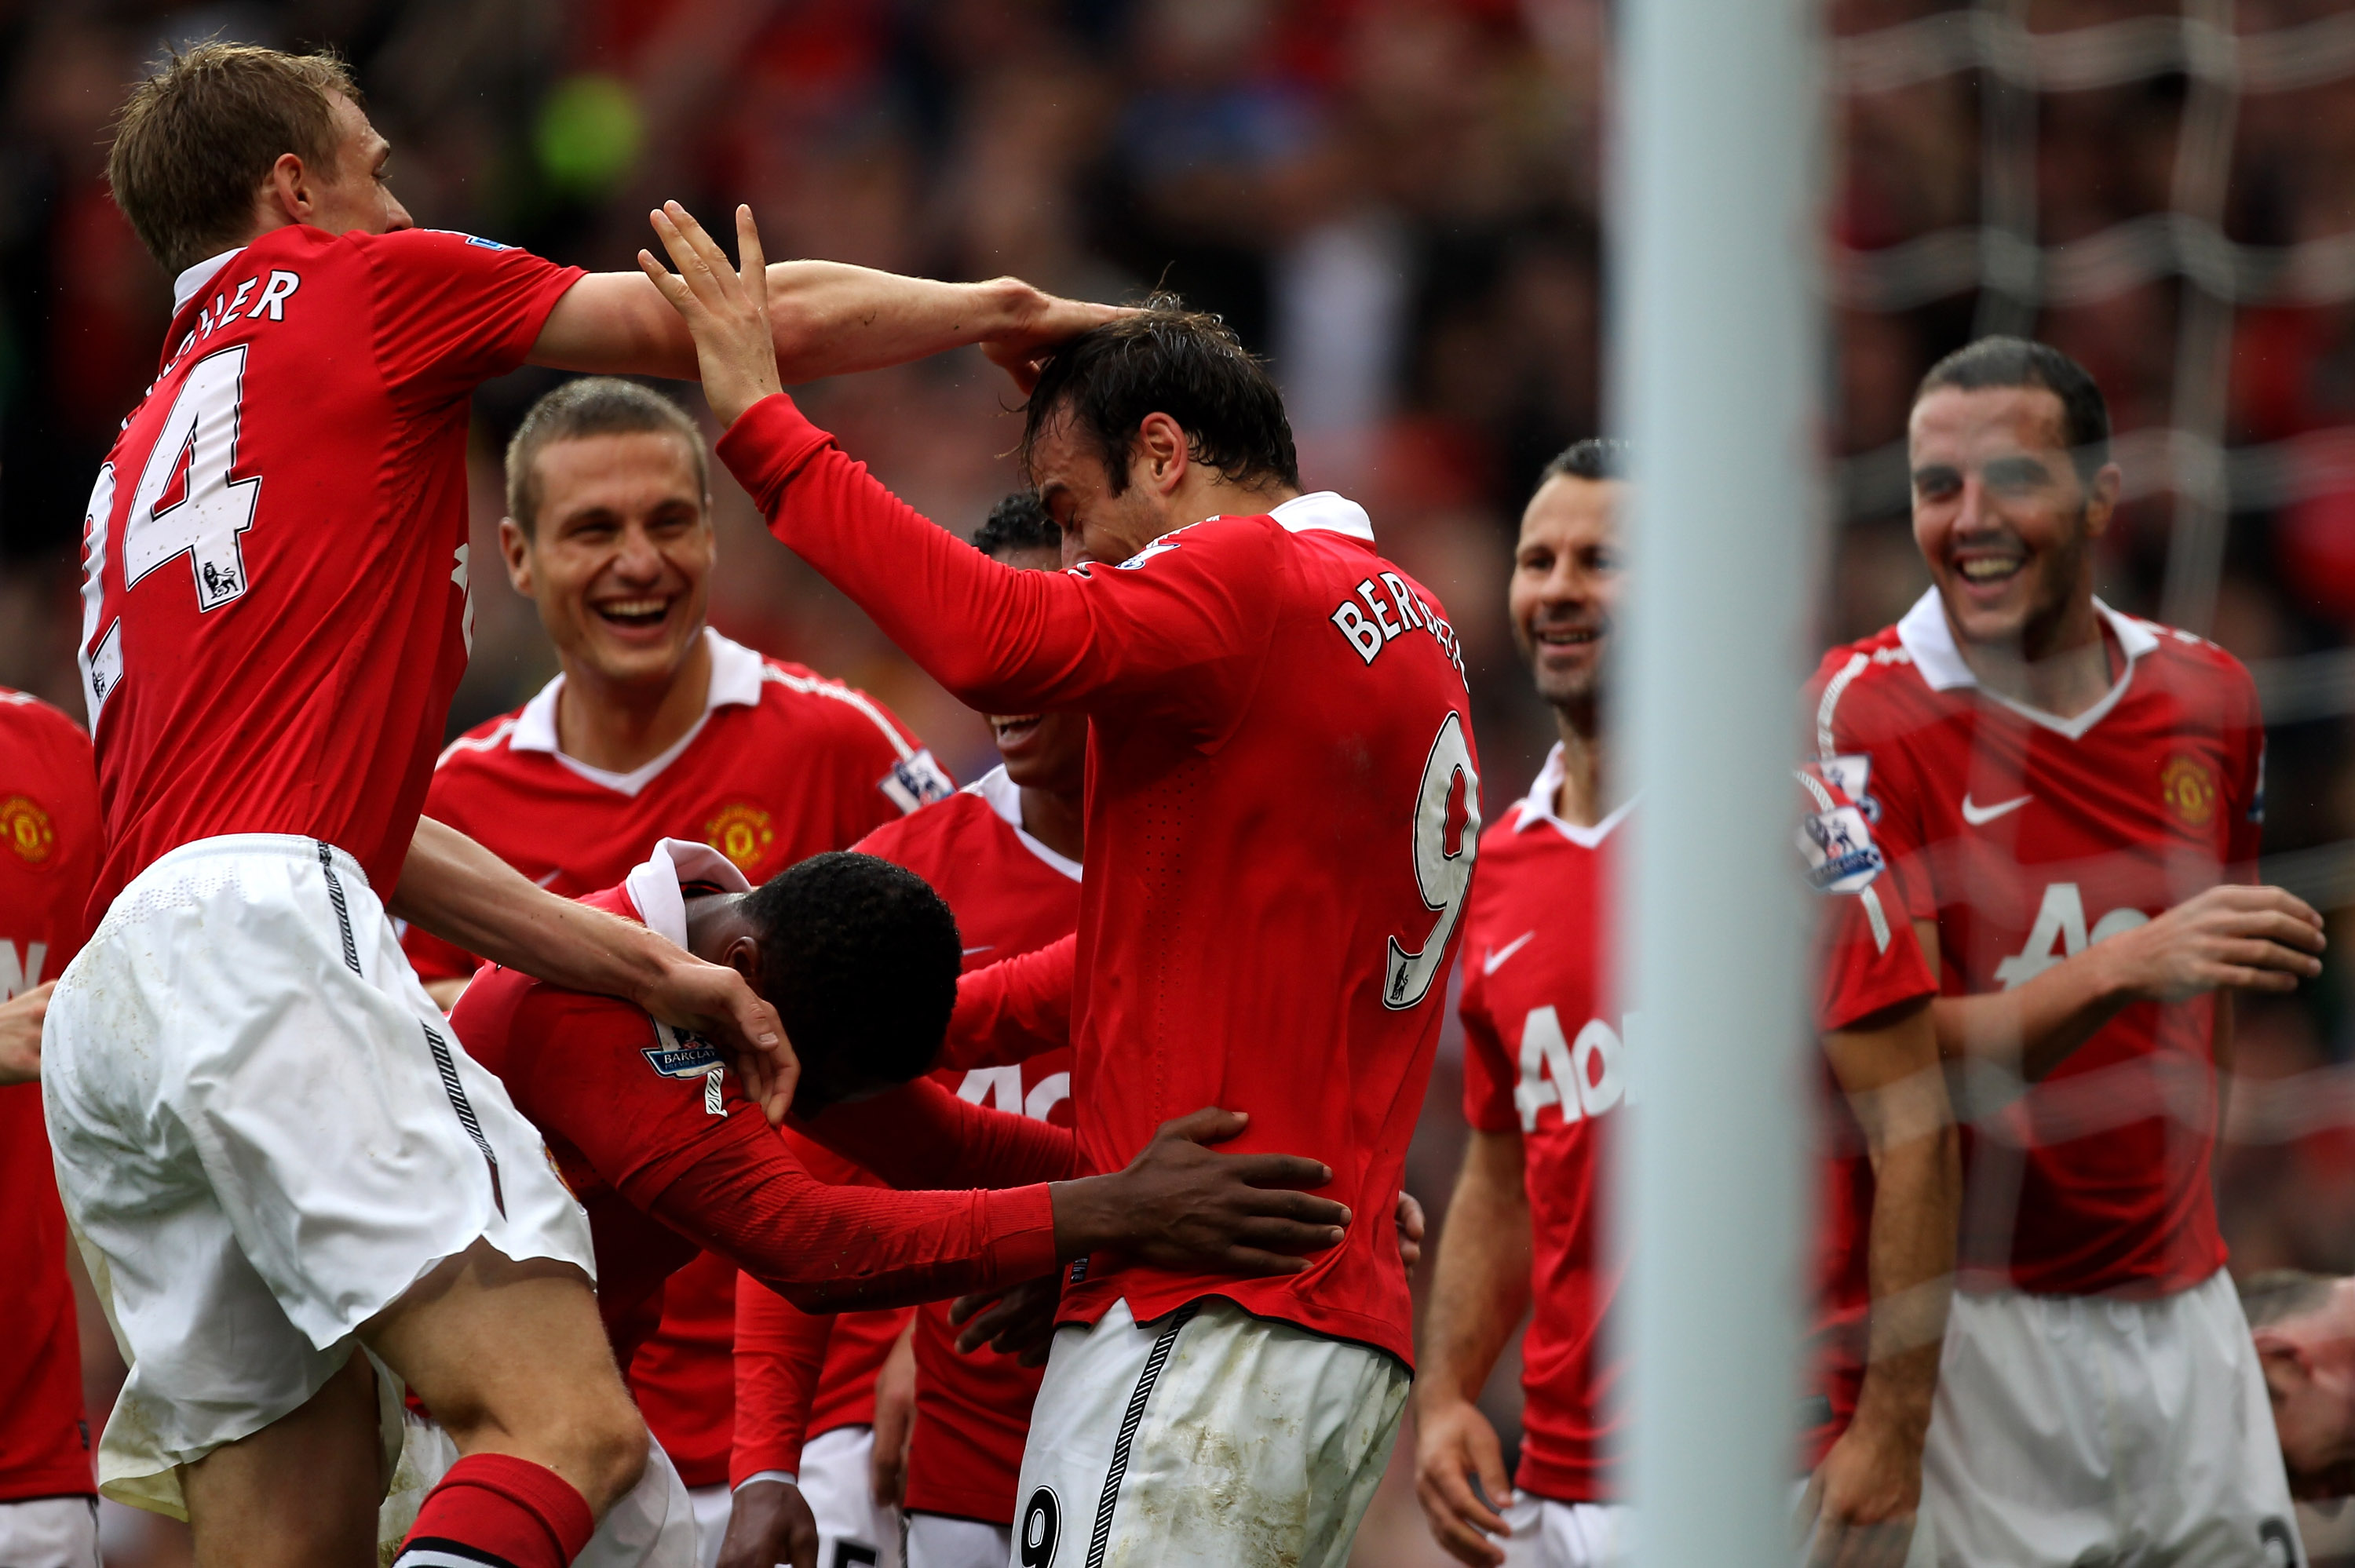 MANCHESTER, ENGLAND - SEPTEMBER 19:  Dimitar Berbatov of Manchester United celebrates scoring his team's second goal with his team mates during the Barclays Premier League match between Manchester United and Liverpool at Old Trafford on September 19, 2010